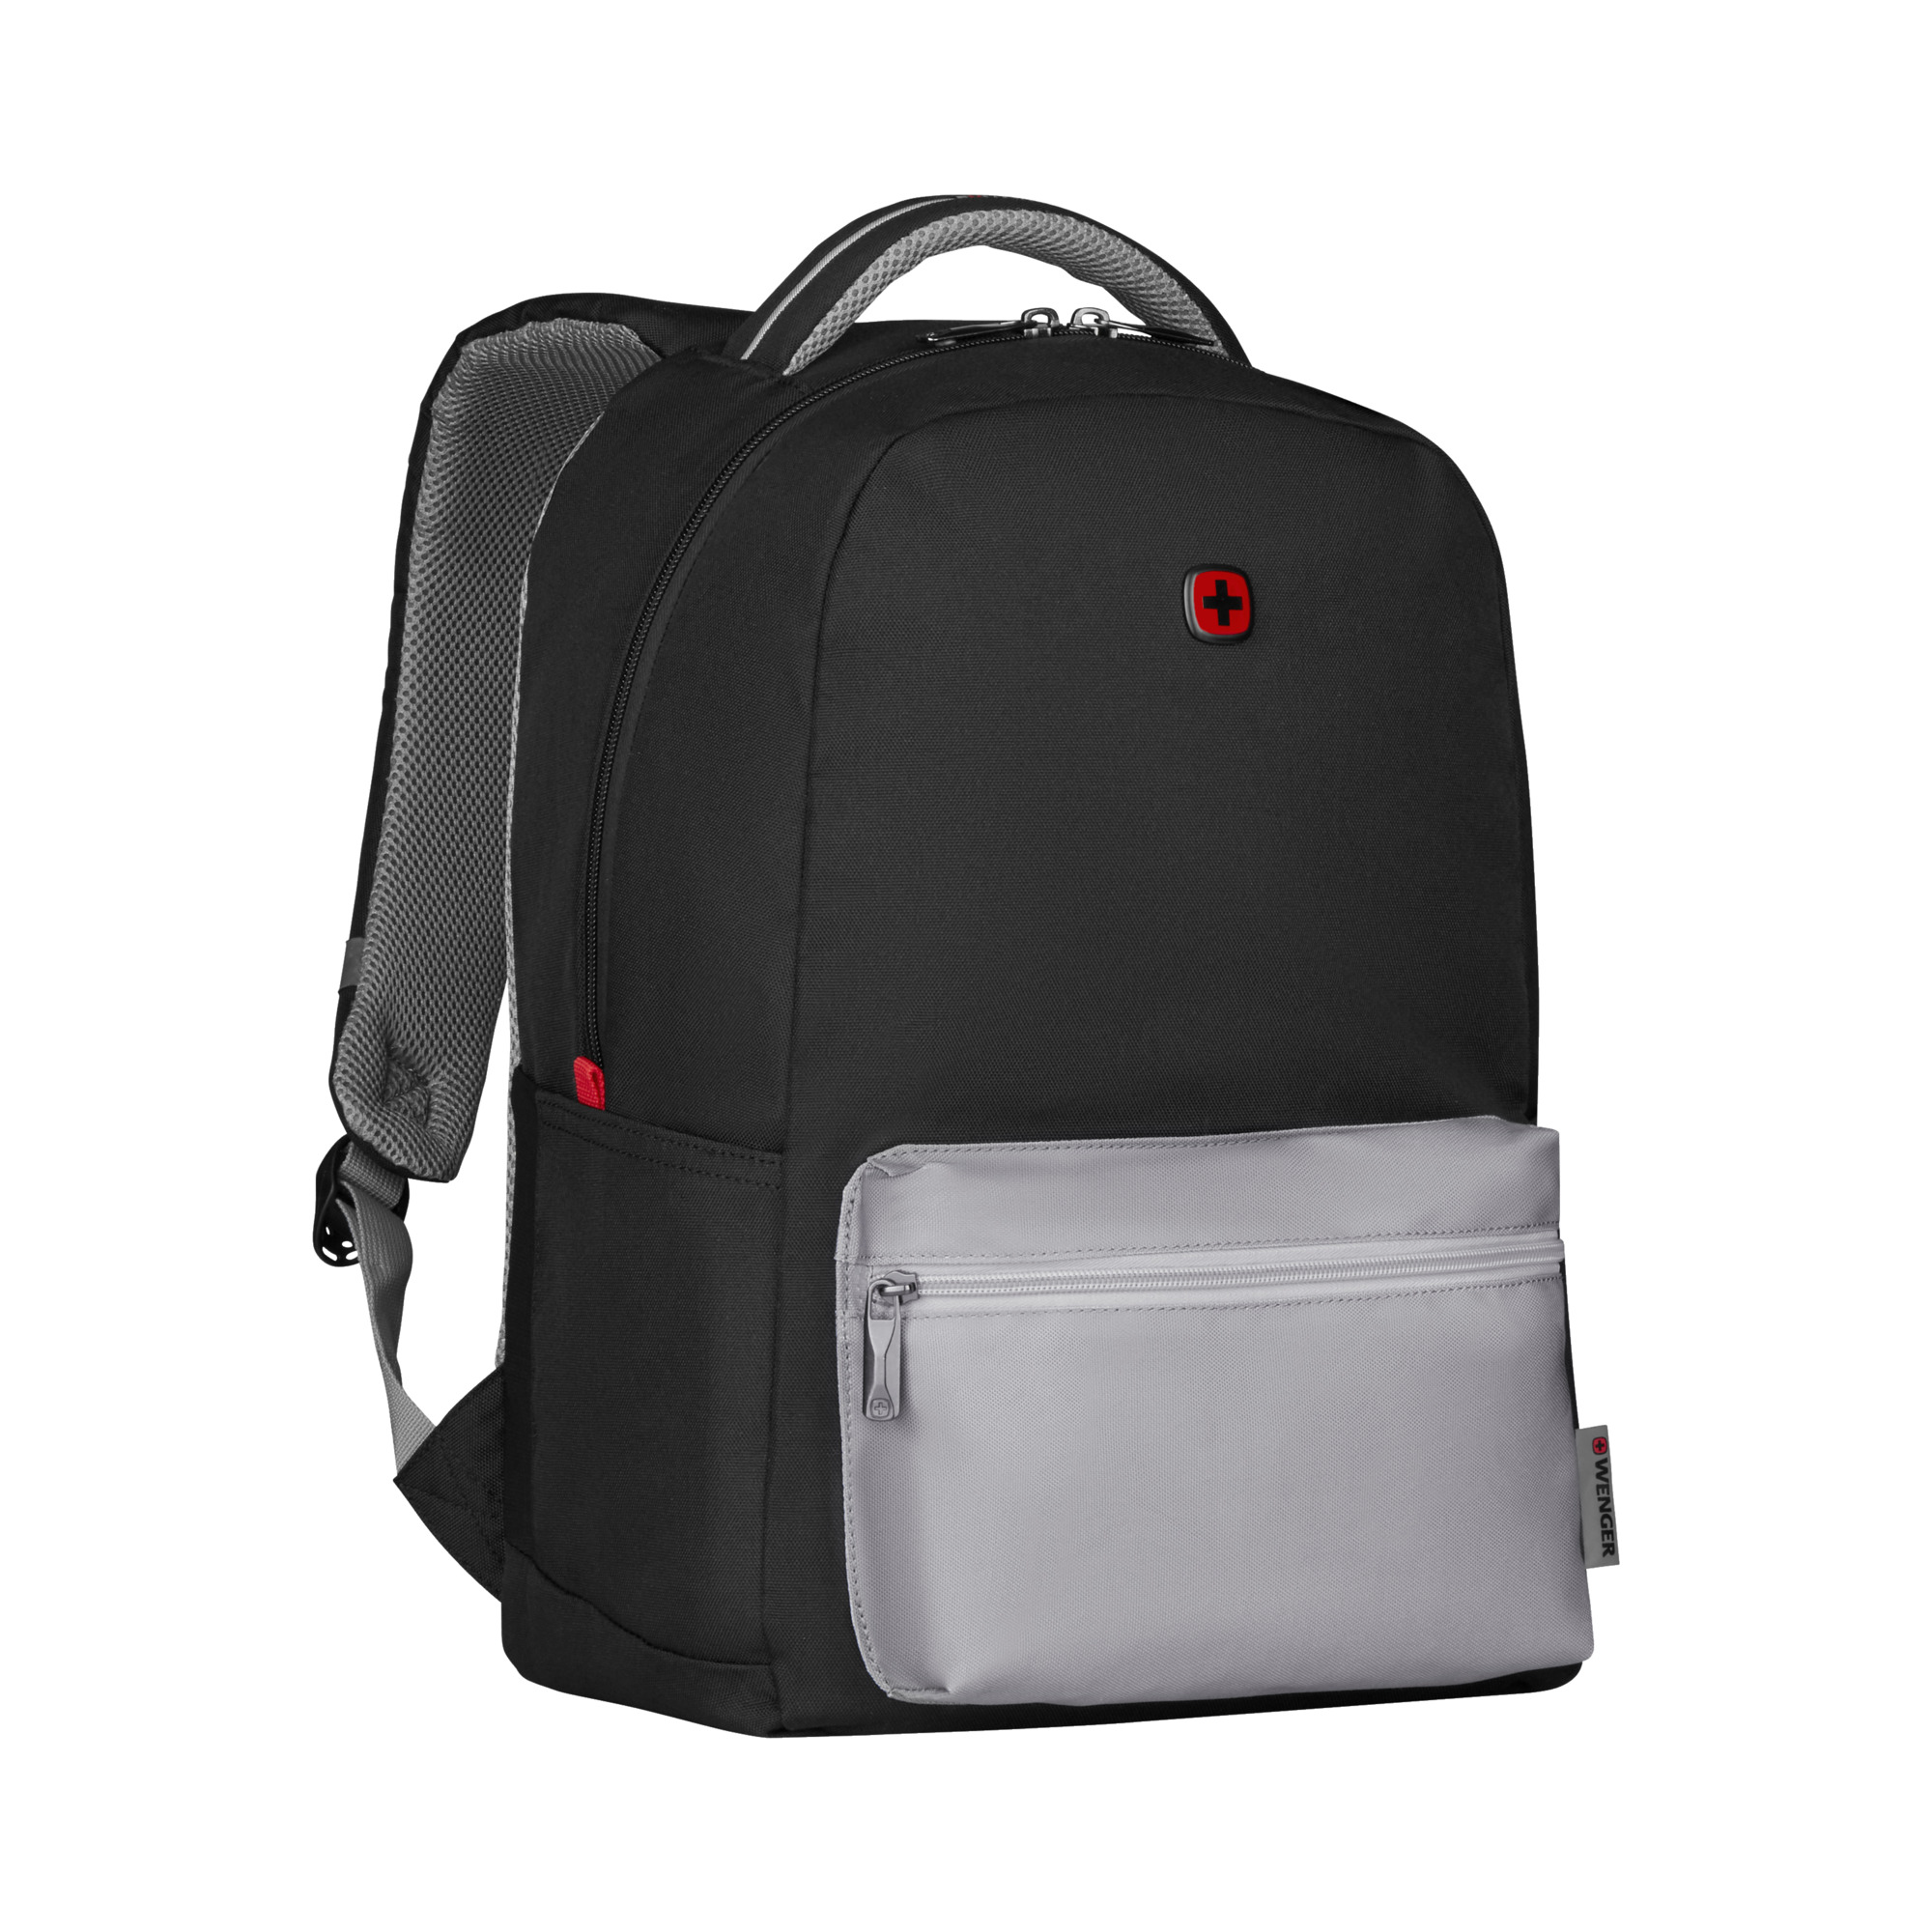 16 inch backpack on person